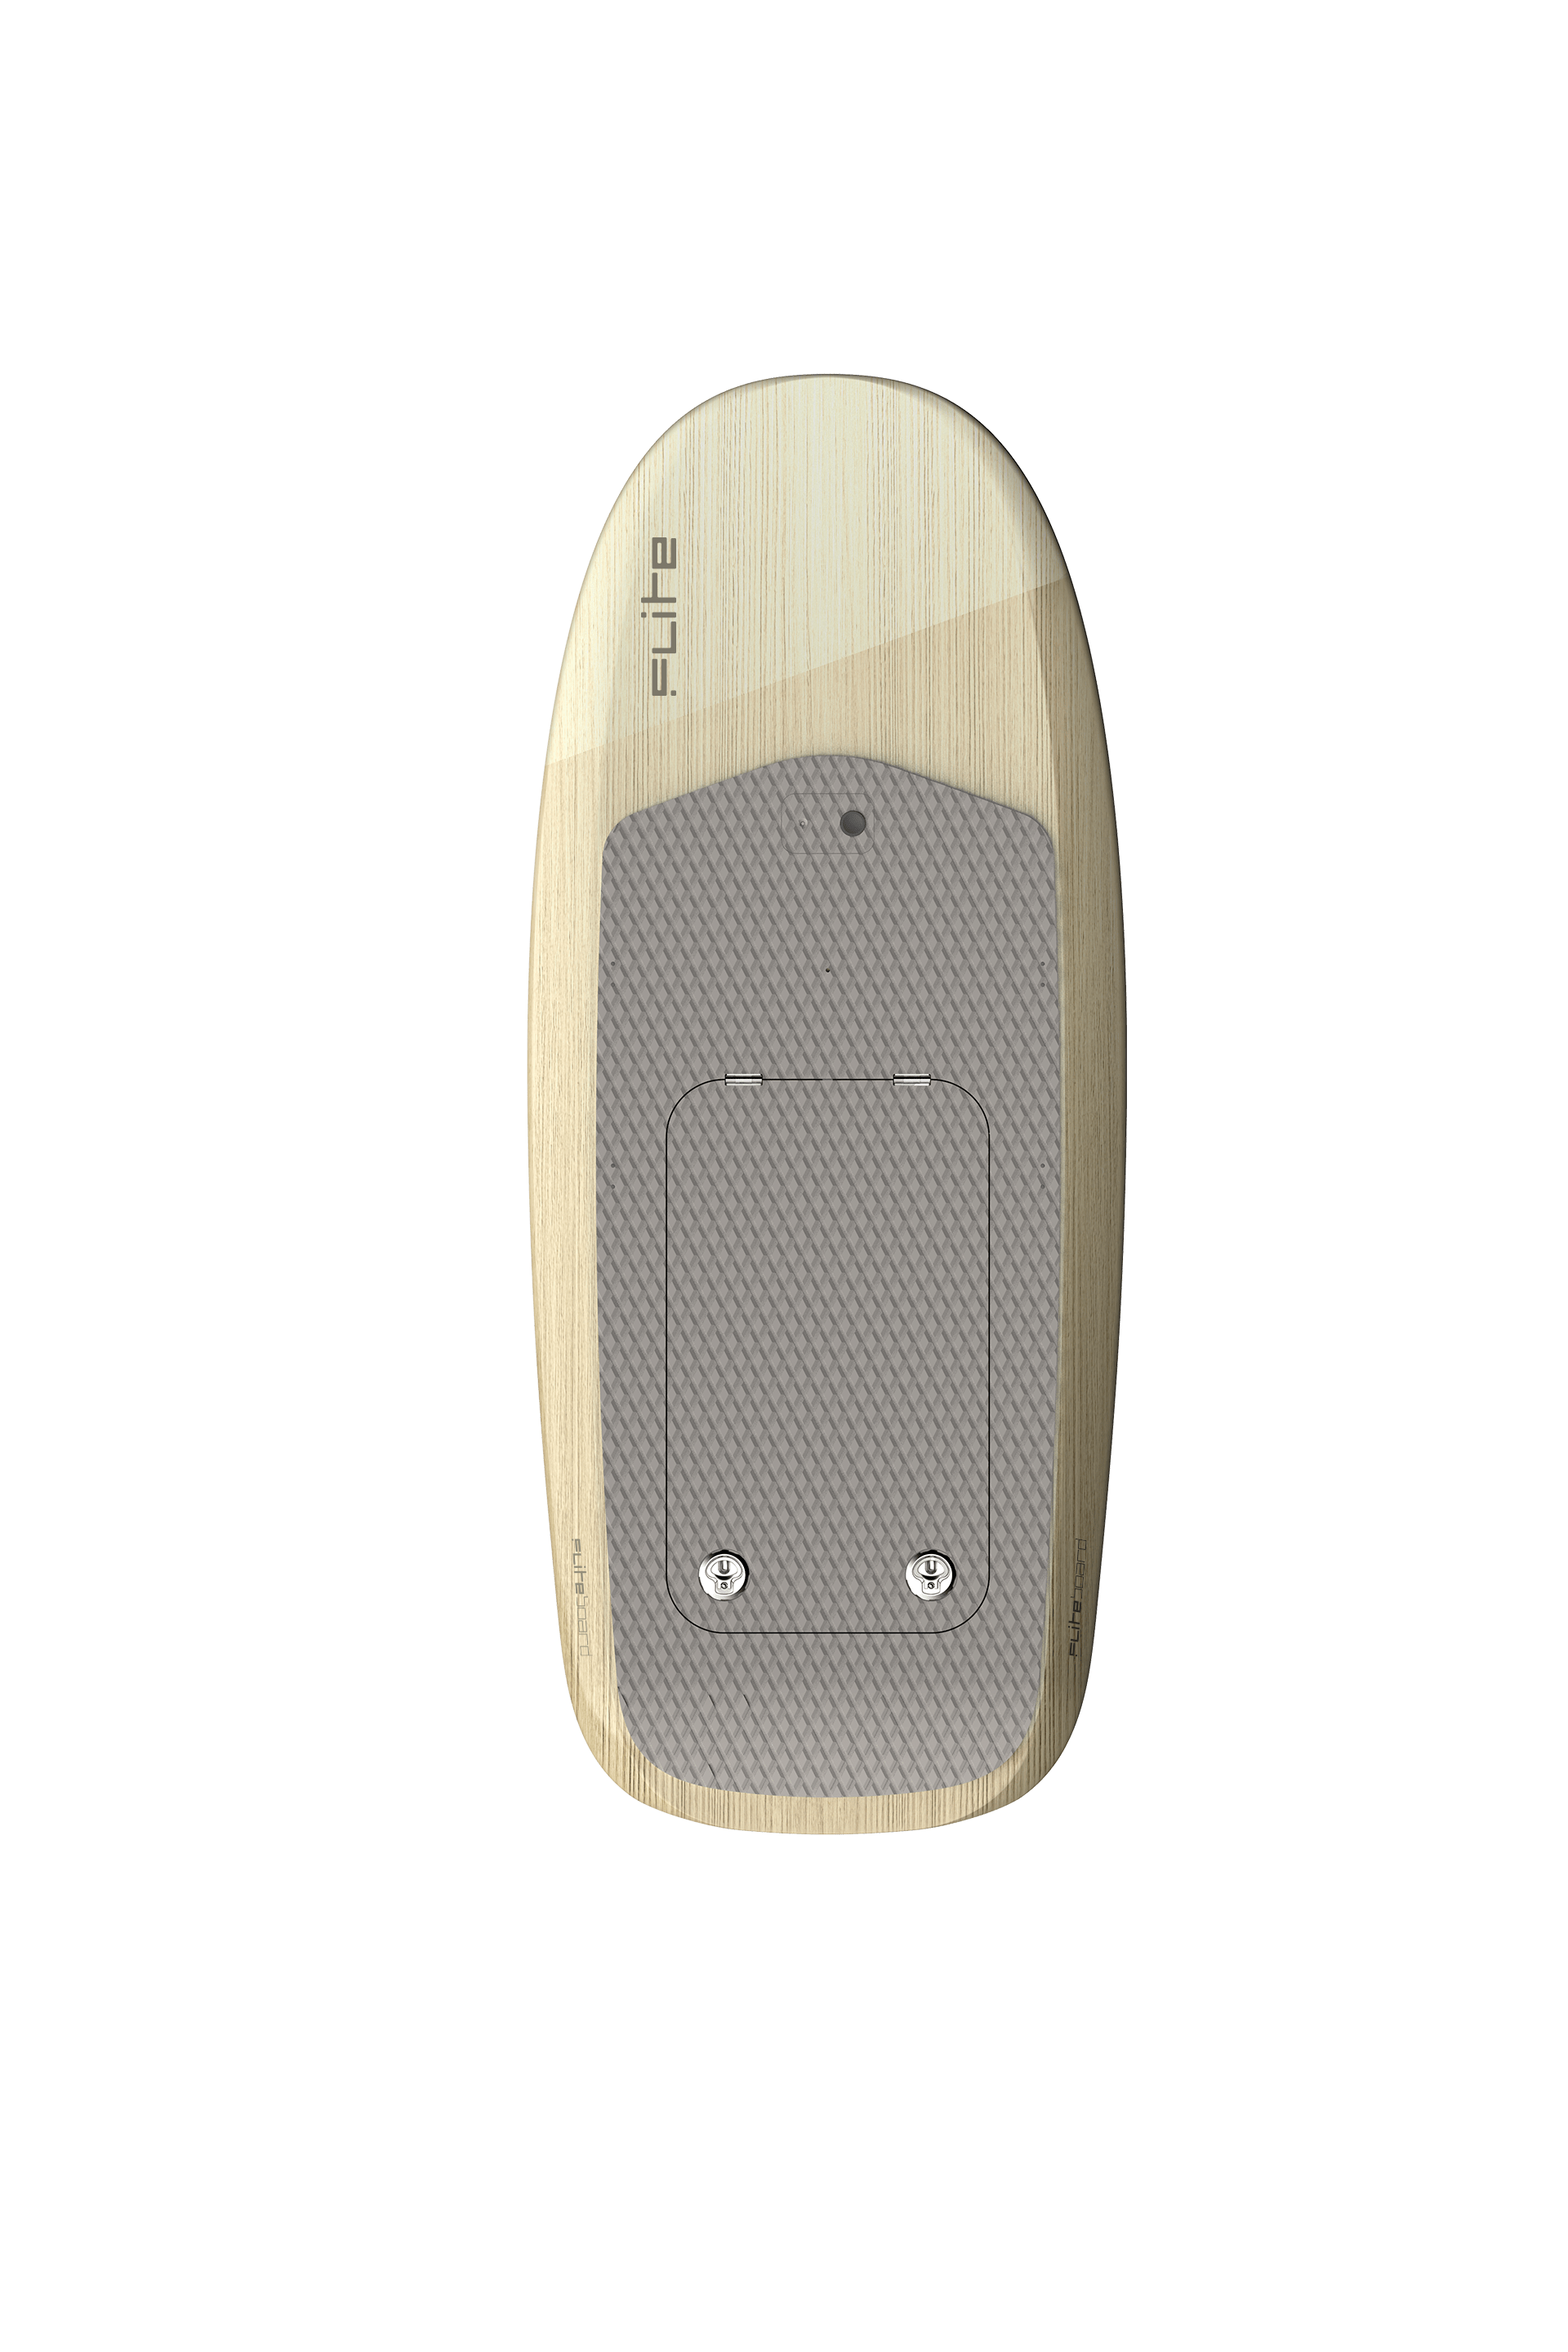 Only boards